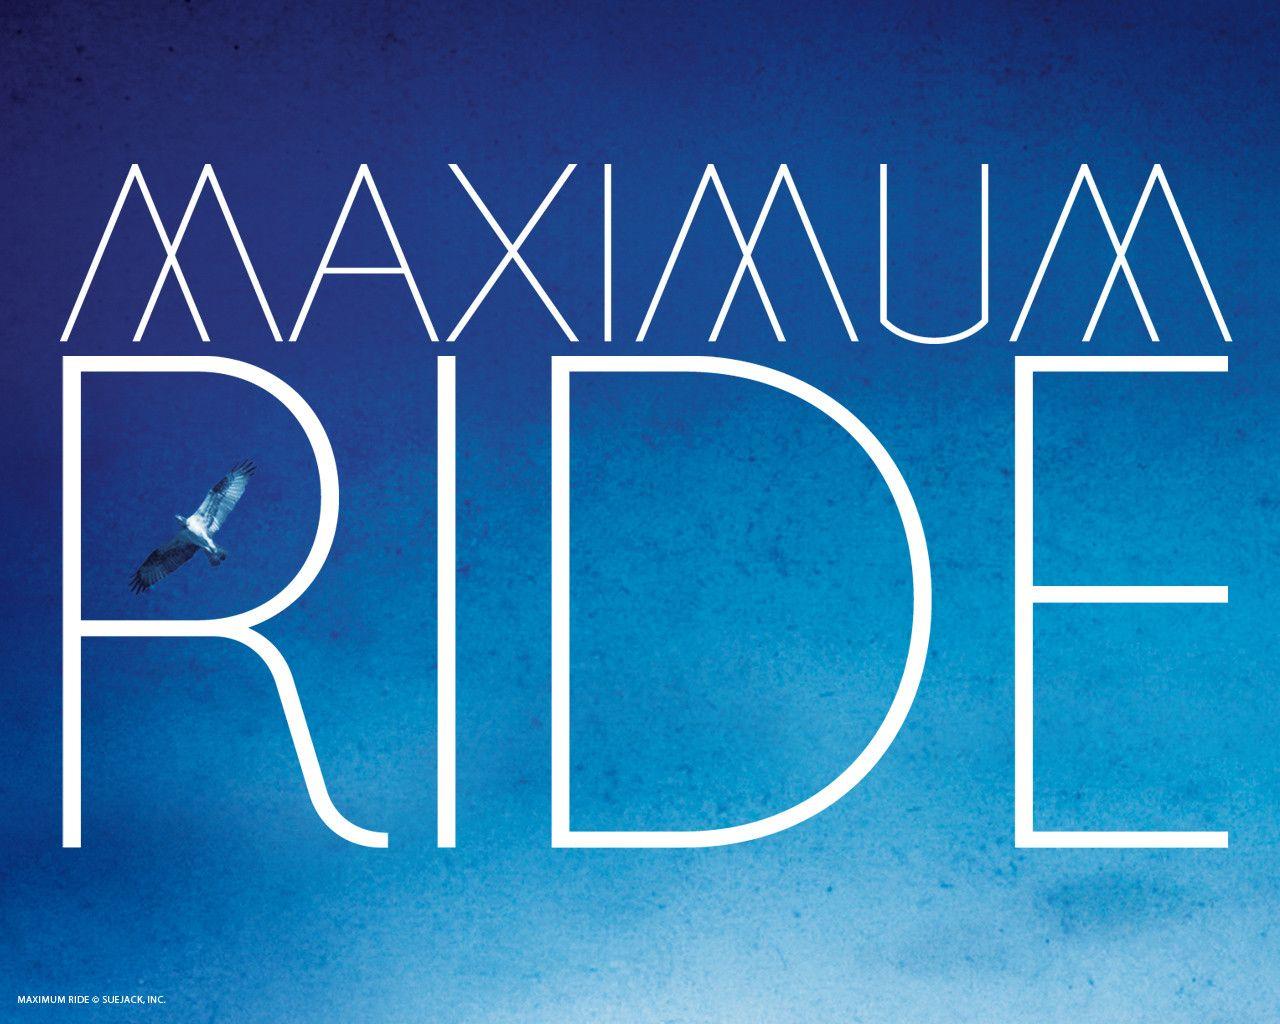 Maximum Ride. Free Downloads, Buddy icons and more!